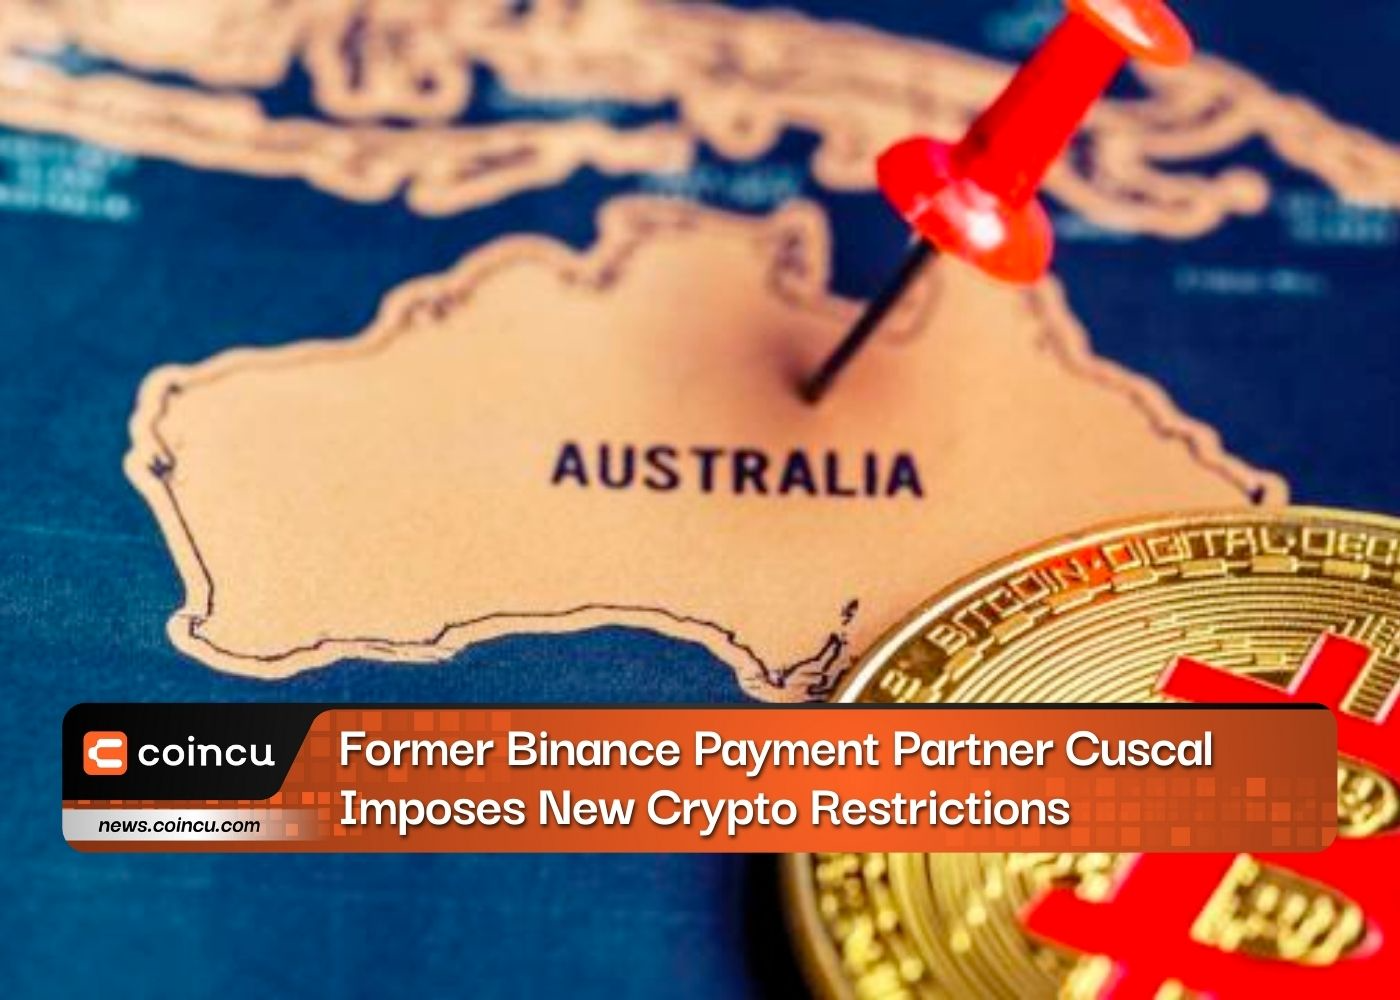 Former Binance Payment Partner Cuscal Imposes New Crypto Restrictions